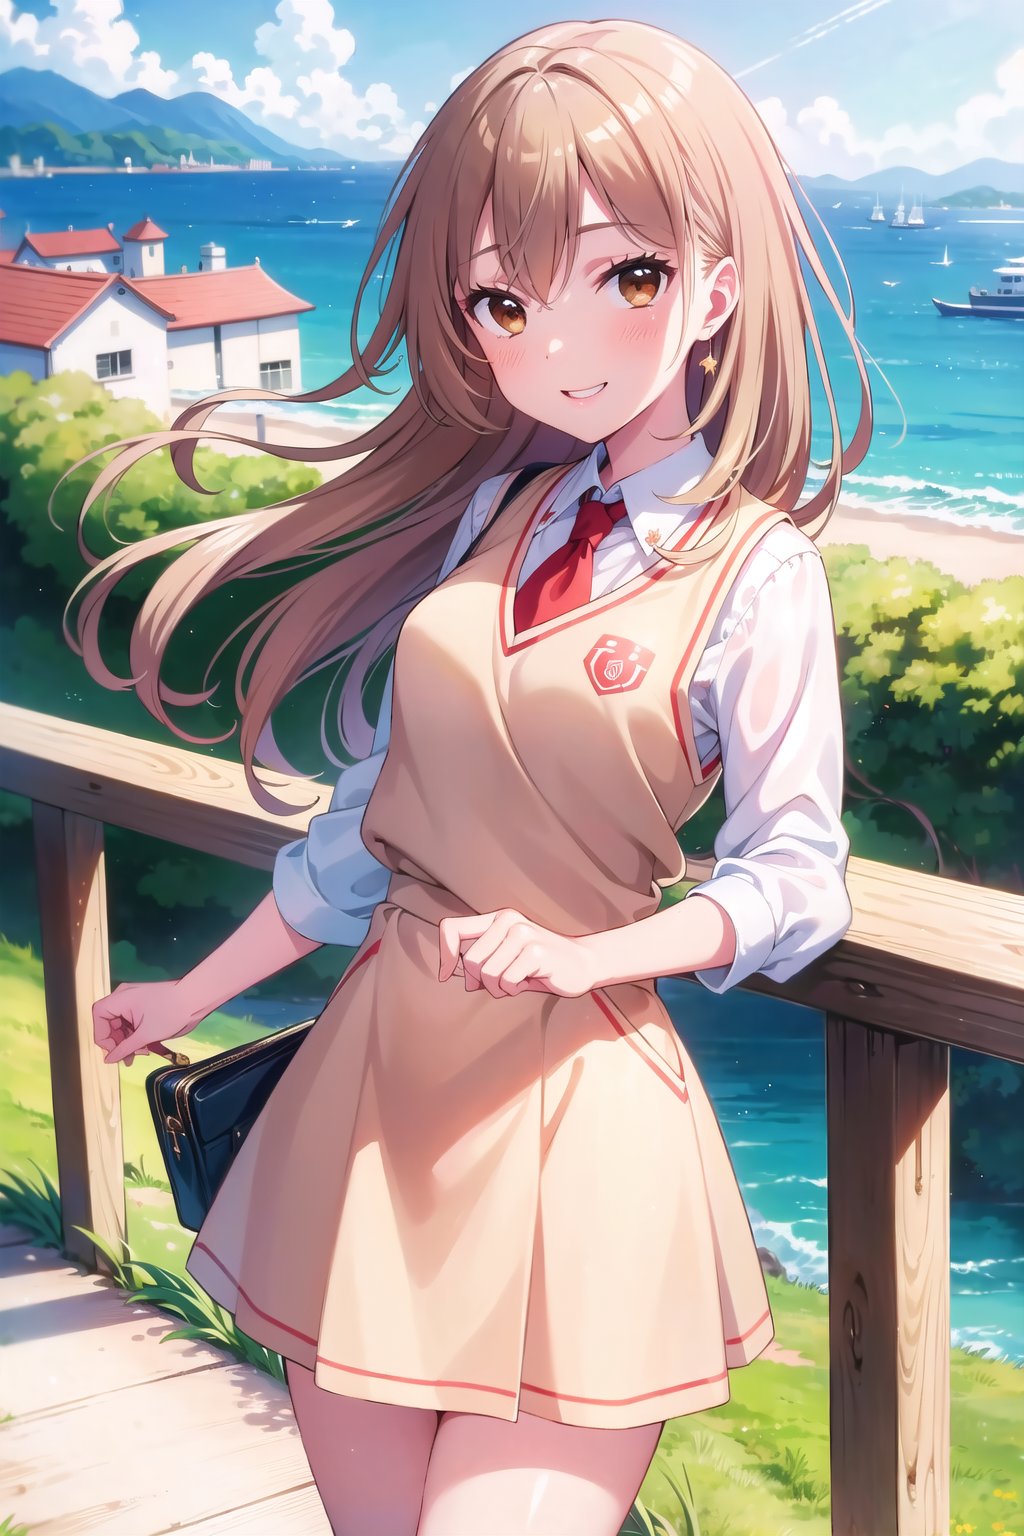 (masterpiece, Best  Quality,  High Quality,  Best Picture Quality Score: 1.3),  (Sharp Picture Quality),  Perfect Beauty: 1.5,light brown Hair,long hair  (Japanese School Uniform),  One,  (Cute School Uniform),  Beautiful Girl,  Cute,mini Skirt,  Very Beautiful View,  Hill with a view of Enoshima Island and Shonan Coast in the backgroundl,Fluttering Skirt,  (Most fantastic view), A girl standing on a hilltop,best smile,Yellow vest,hikari